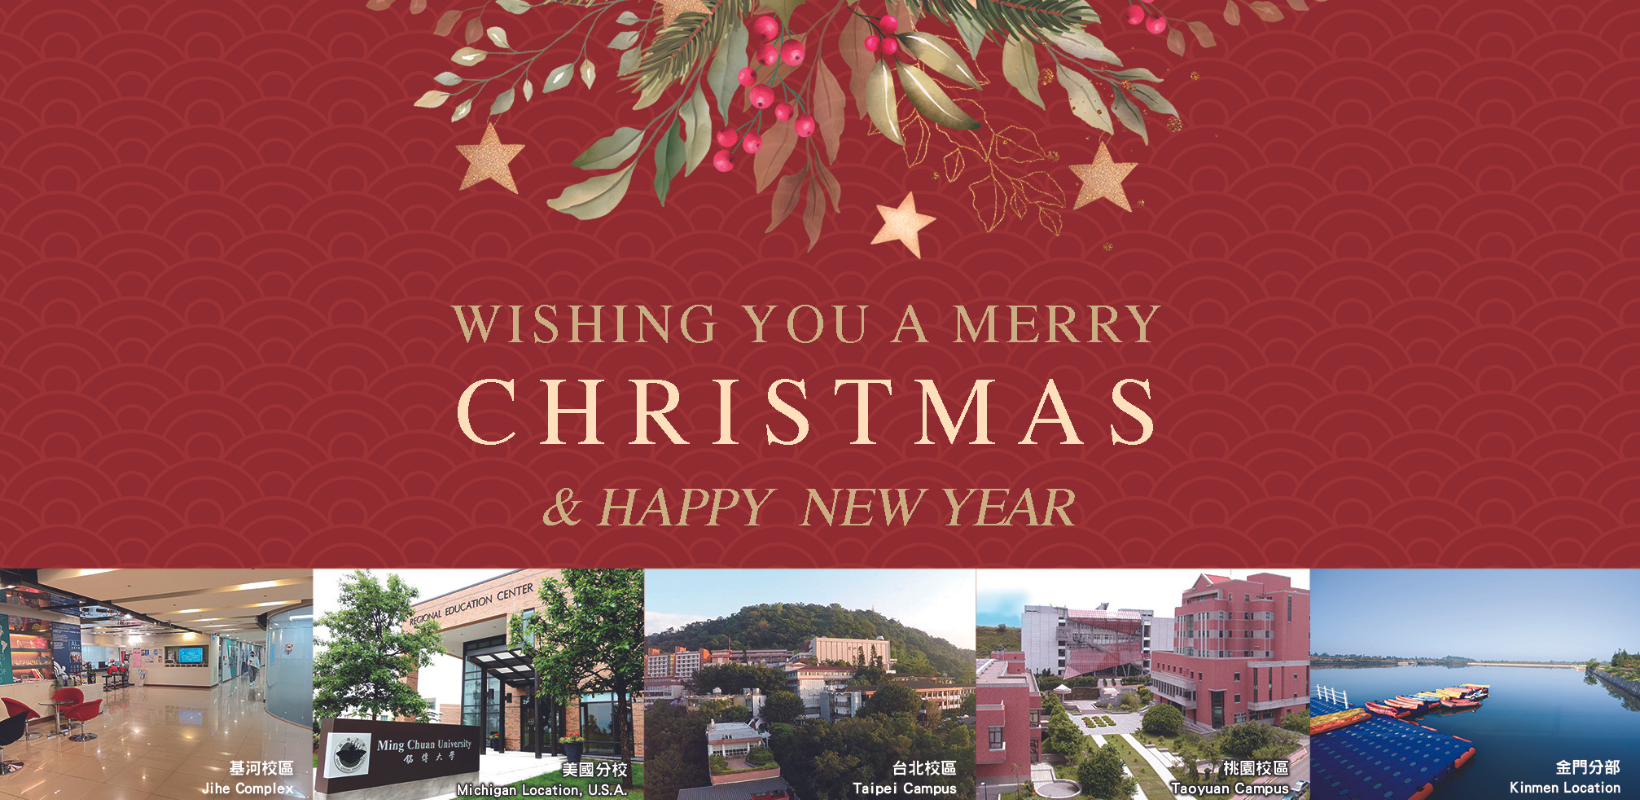 Featured image for “Please collect the Ming Chuan University Christmas & New Year greeting cards at your respective campus by December 20th”